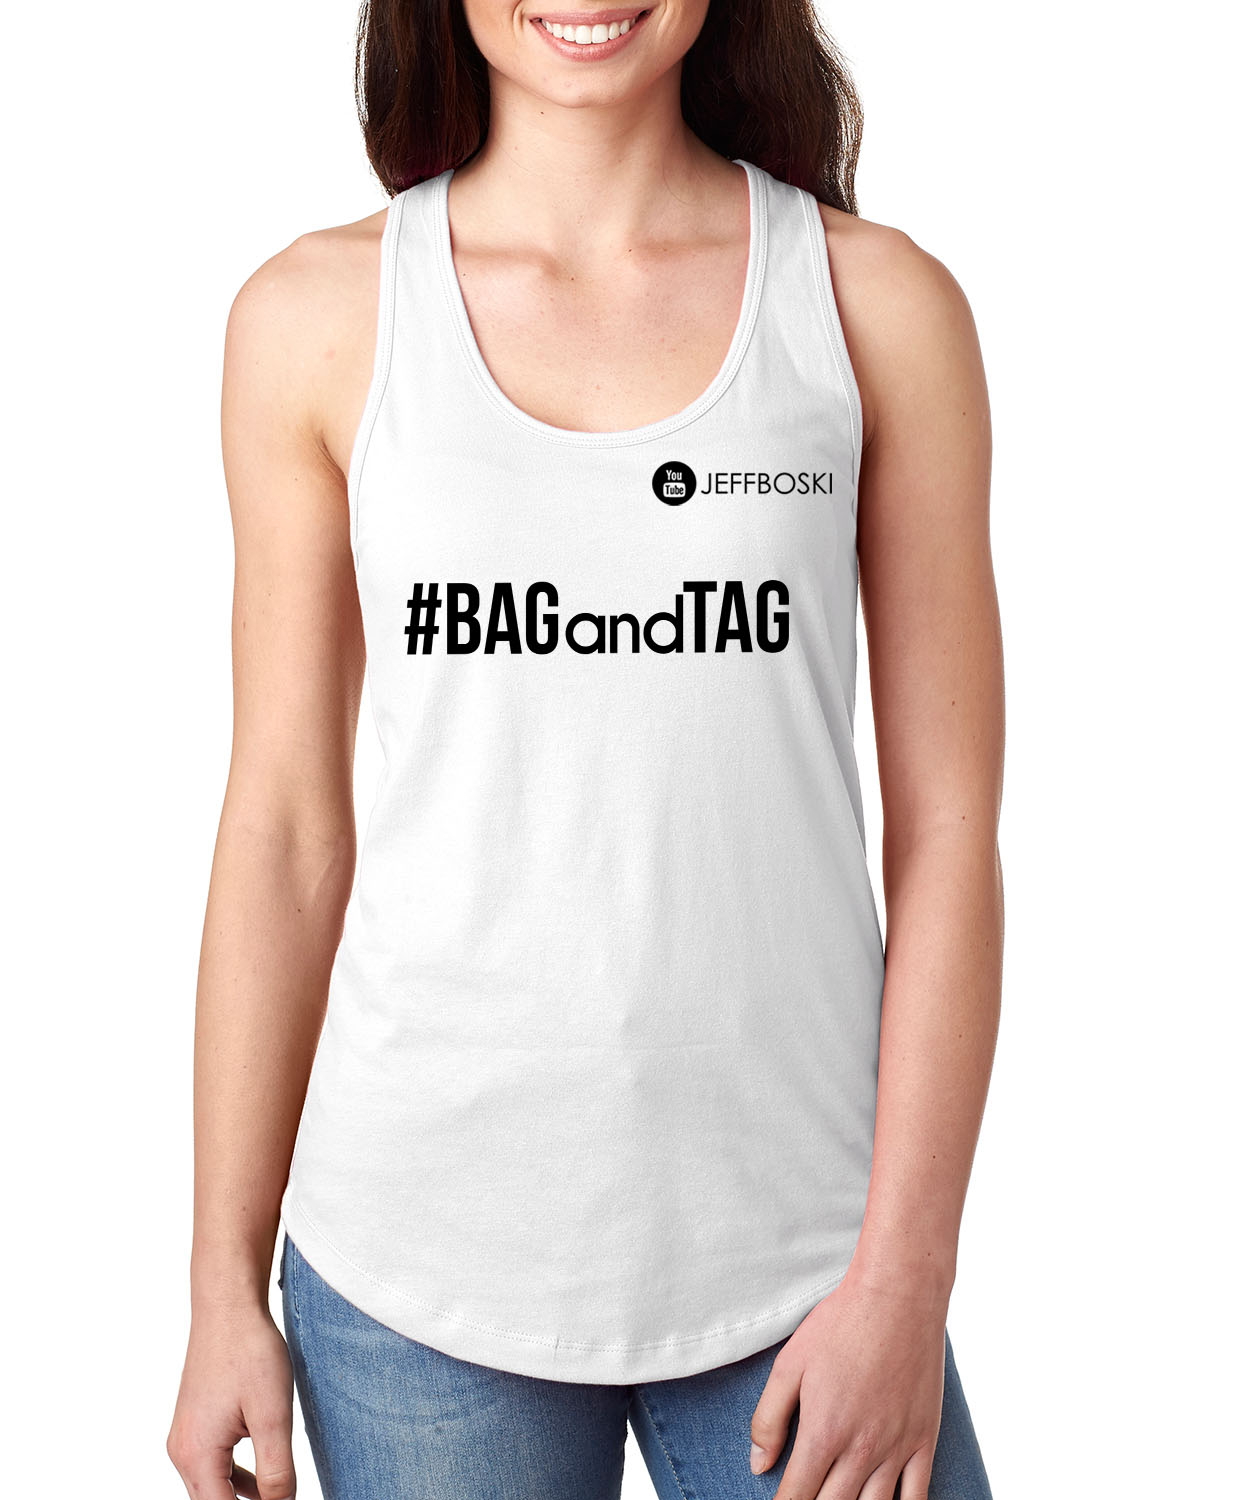 BAG and TAG Ladies Next Level Tank